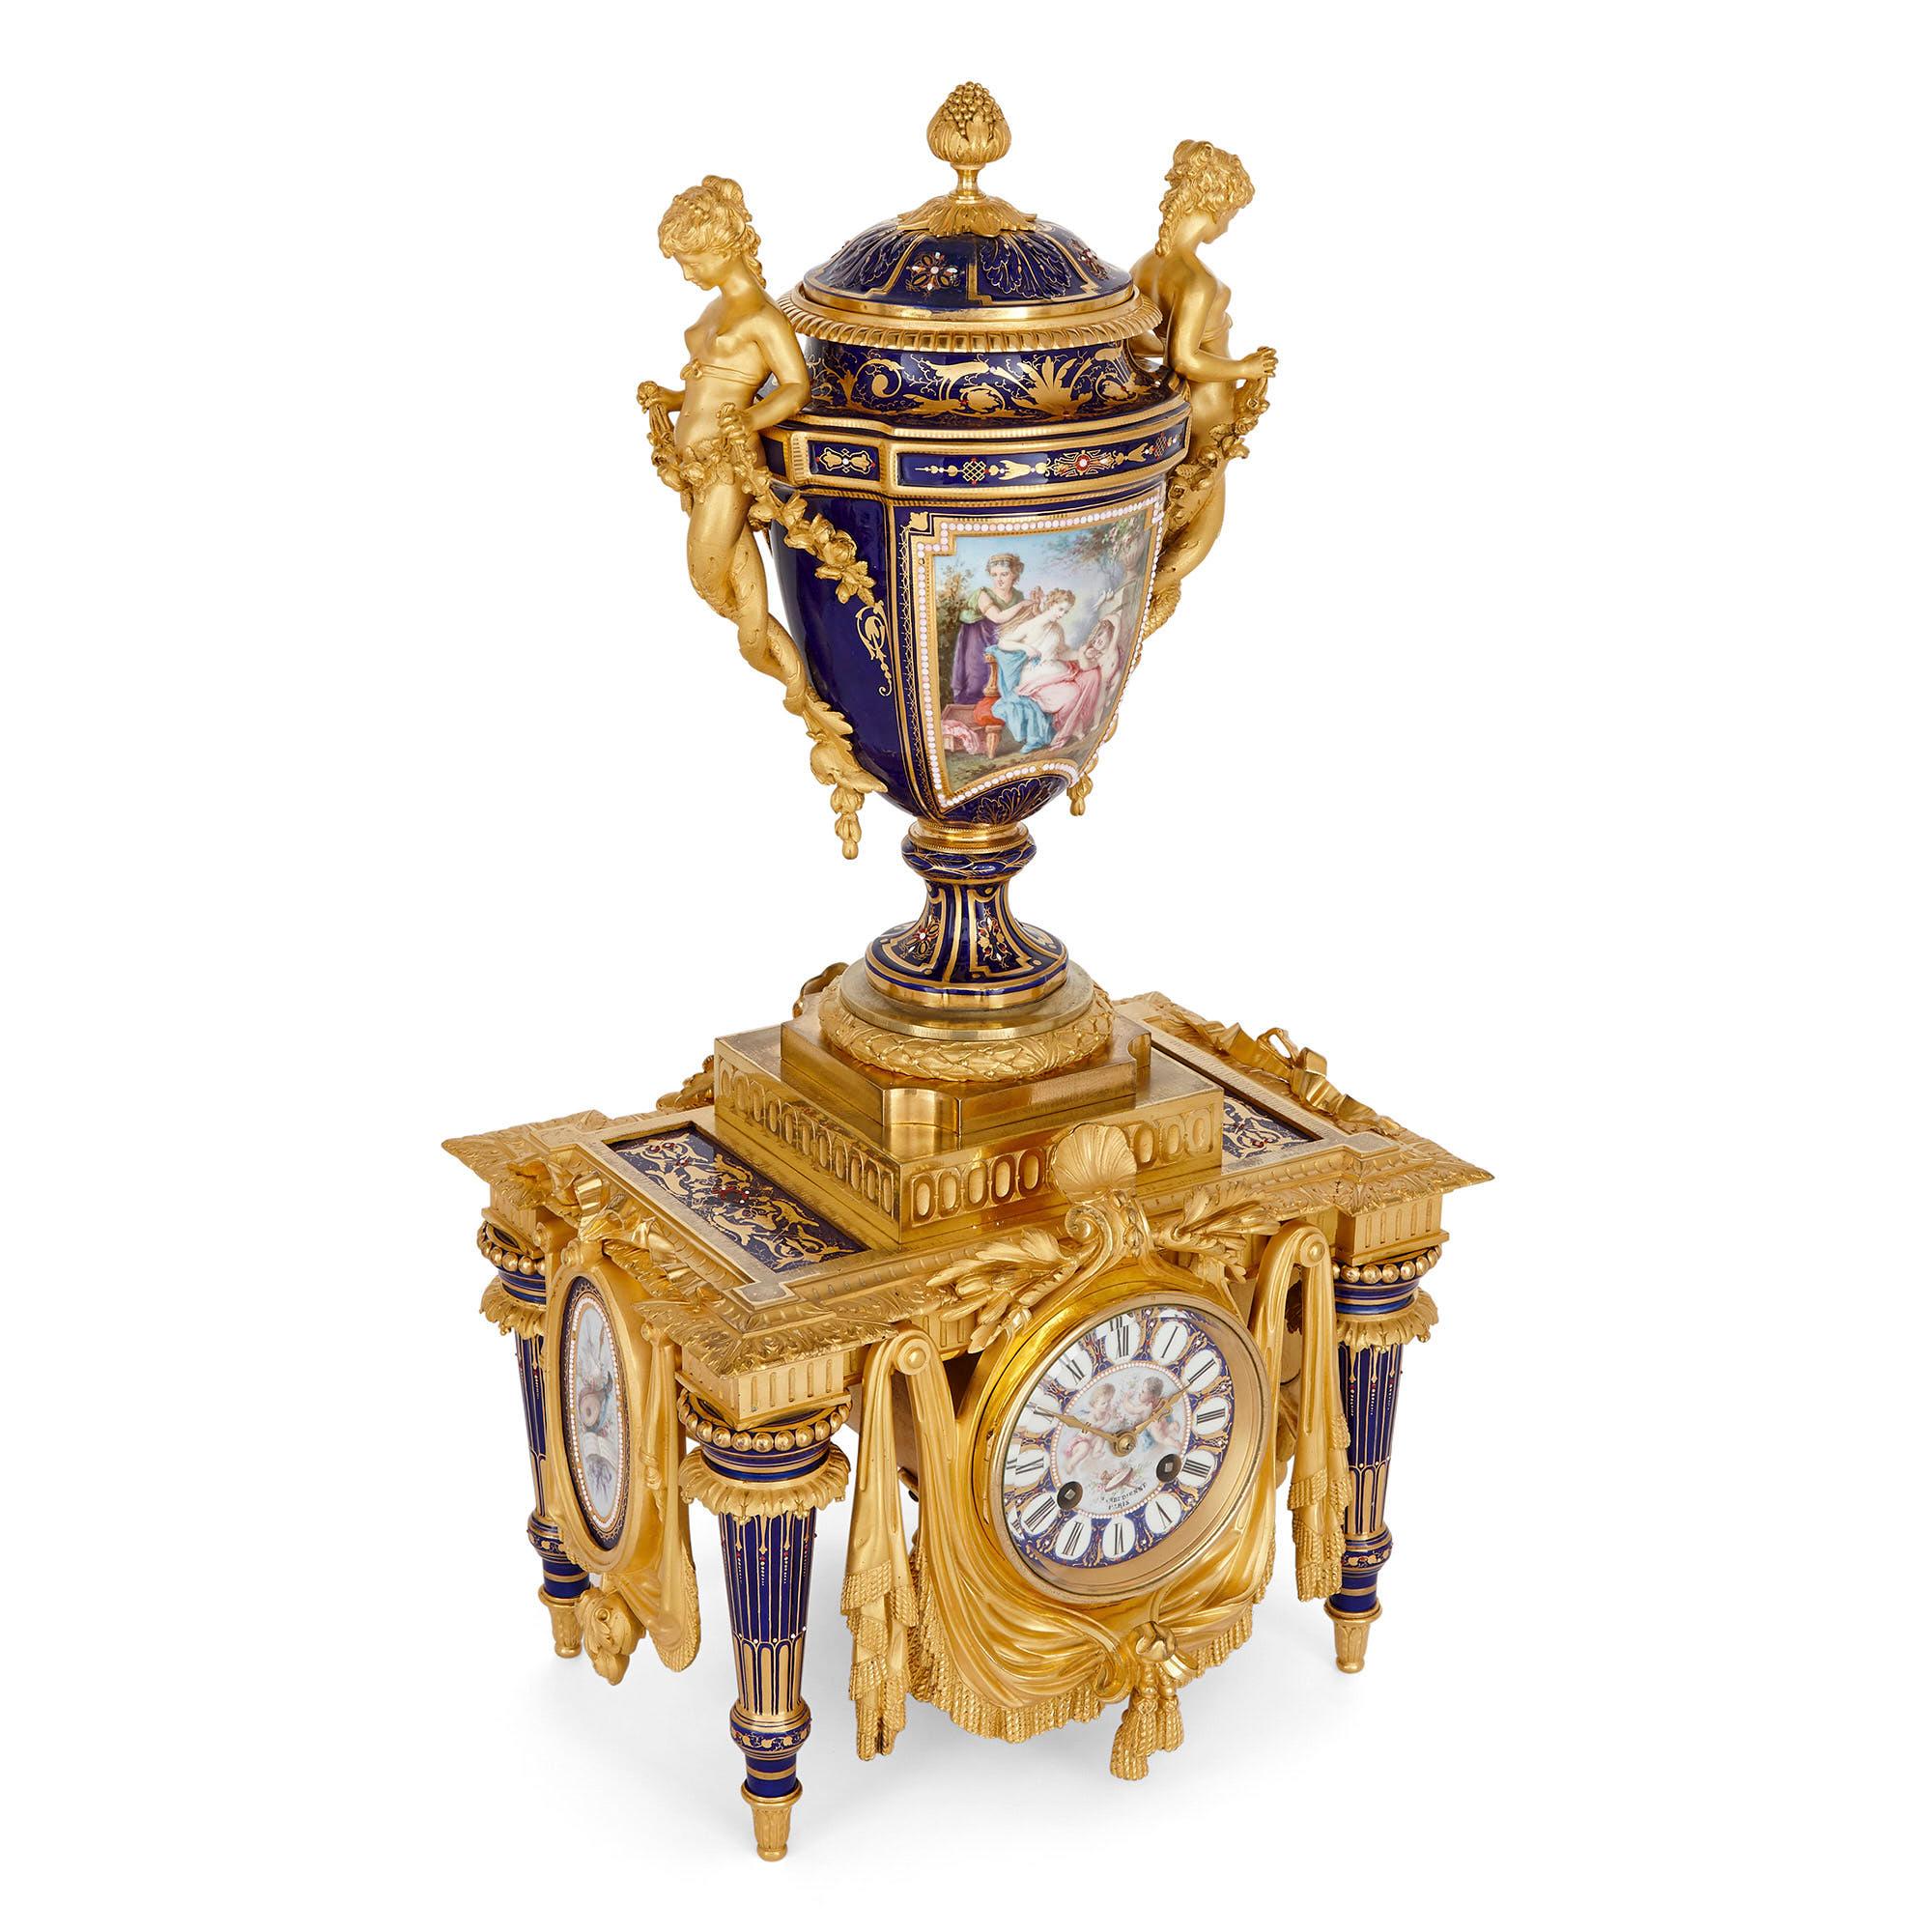 Neoclassical style porcelain and gilt bronze clock set by Barbedienne
French, late 19th Century
Clock: Height 53cm, width 27cm, depth 24cm
Candelabra: Height 56cm, width 19cm, depth 16cm

This superb clock set was designed in the late 19th